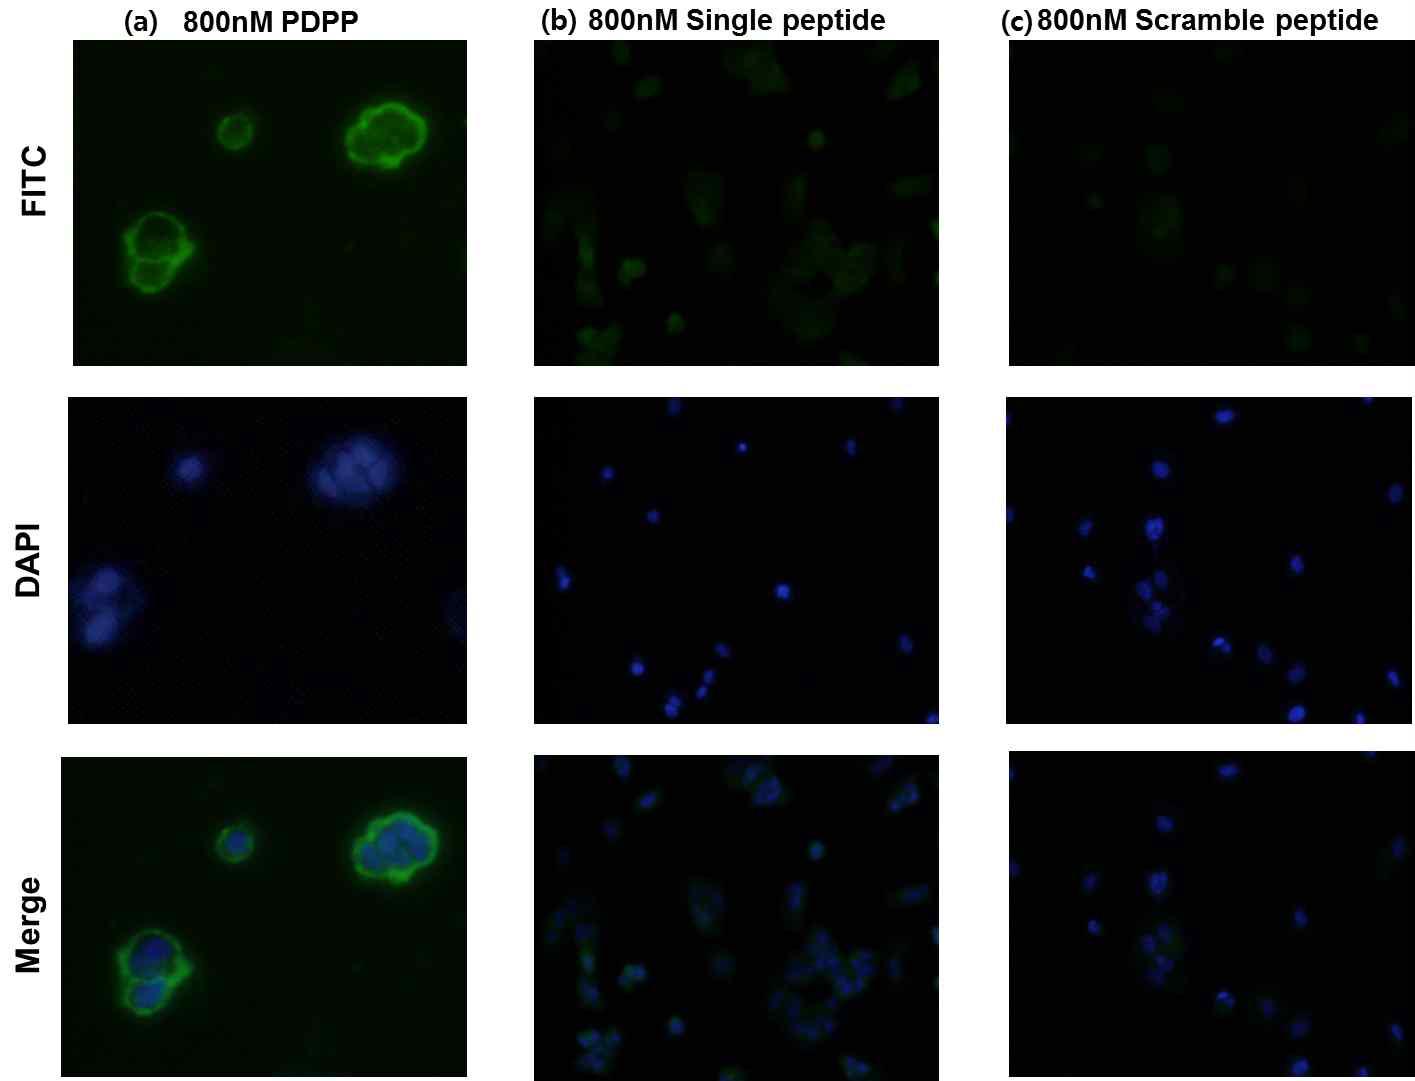 Incubation of FITC-conjugated CD44ED-binding PDPP (FITC-P7,P6), Single peptide and scramble peptide with human breast cancer cells (MCF7)